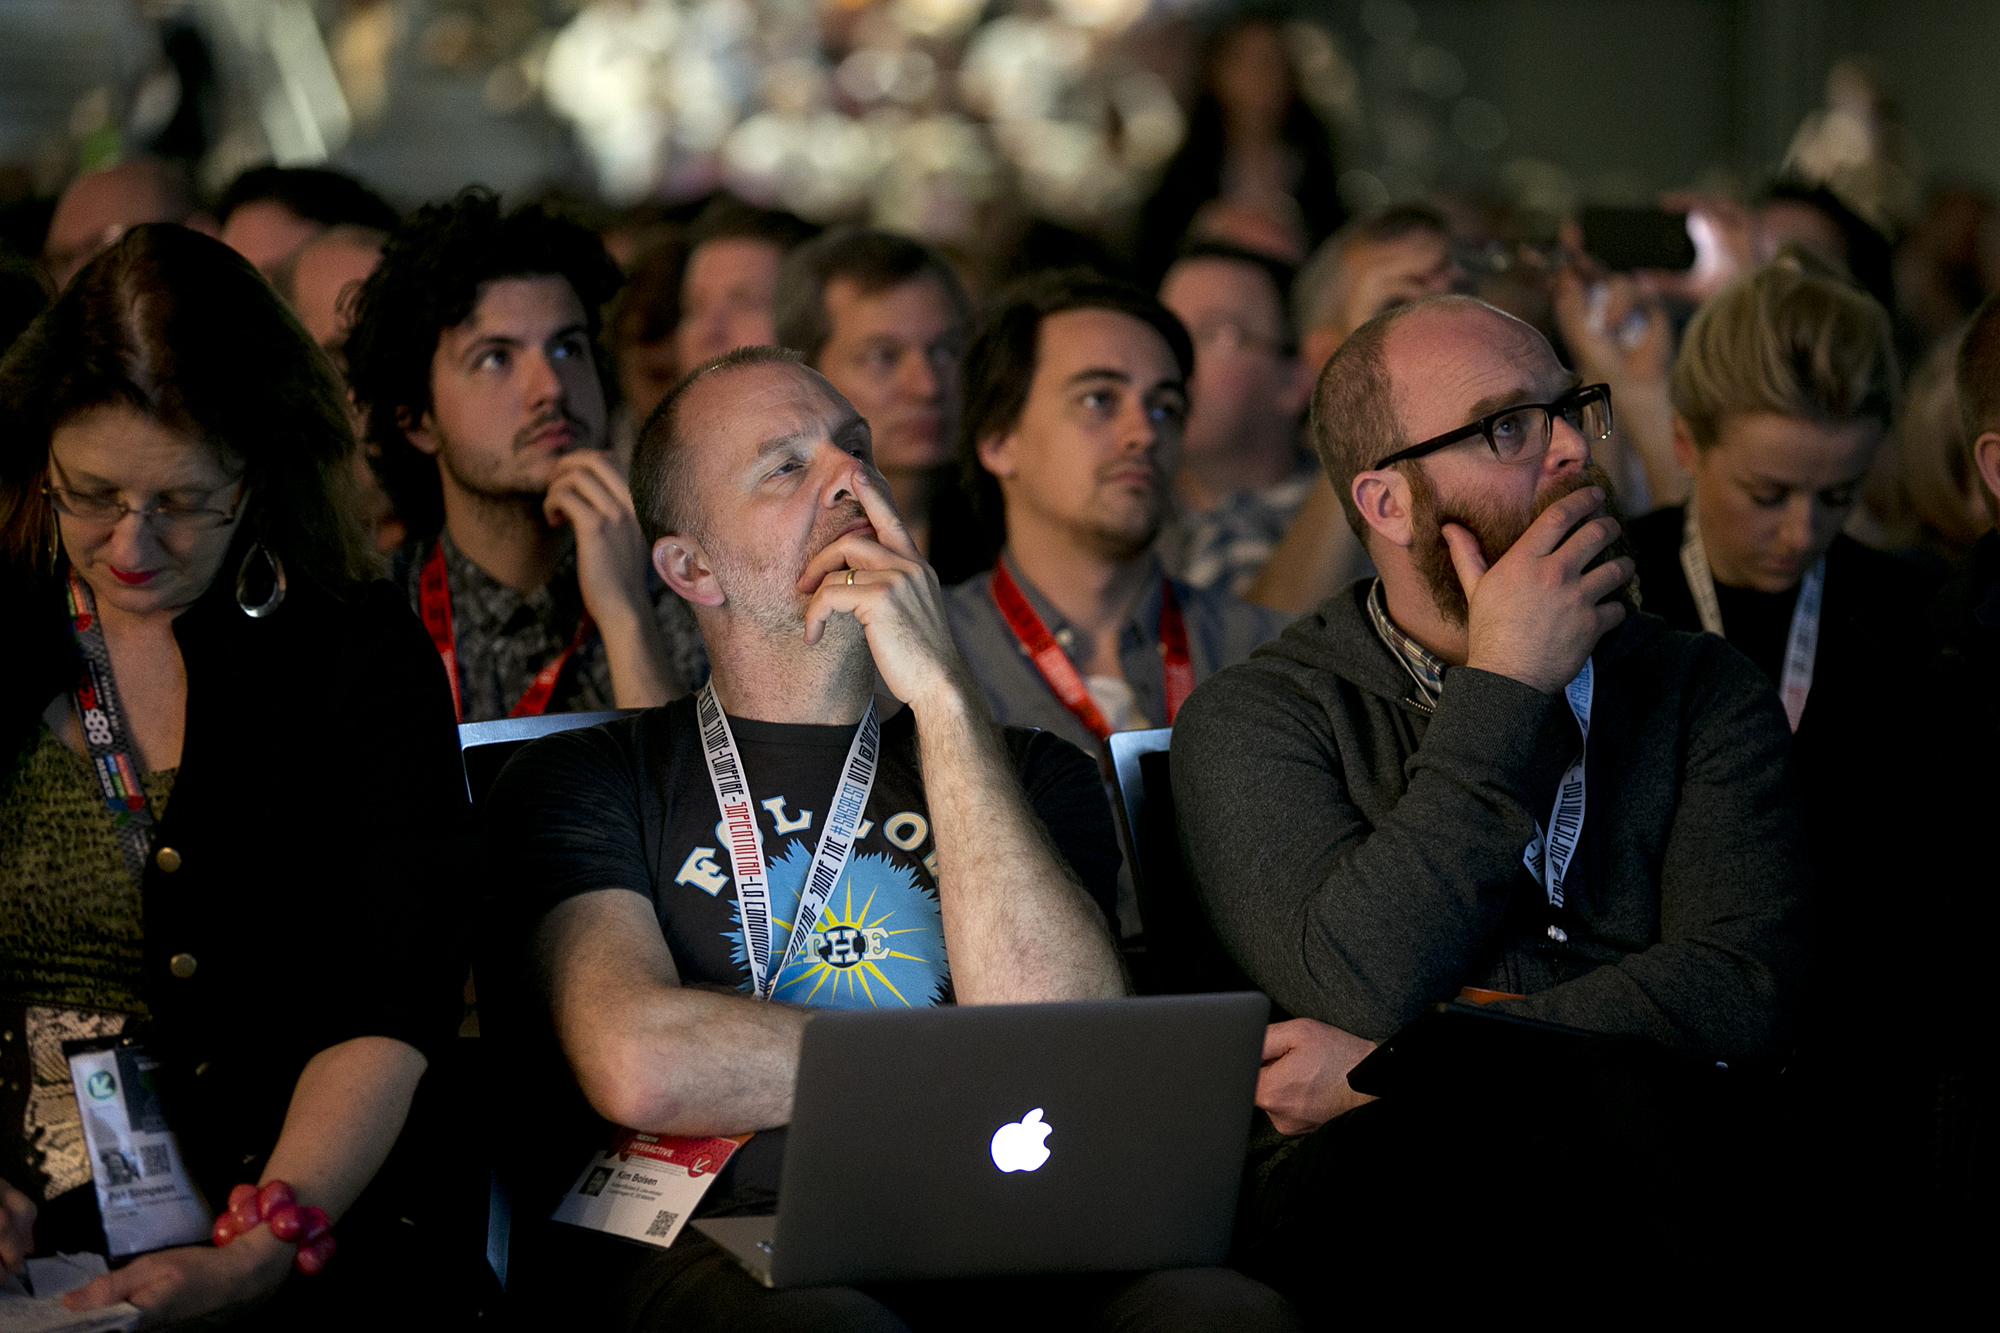 People listen intently during Bill Gurley and Malcolm Gladwell In Conversation at their talk during SXSW at the Austin Convention Center on Sunday, March 15, 2015. DEBORAH CANNON / AMERICAN-STATESMAN